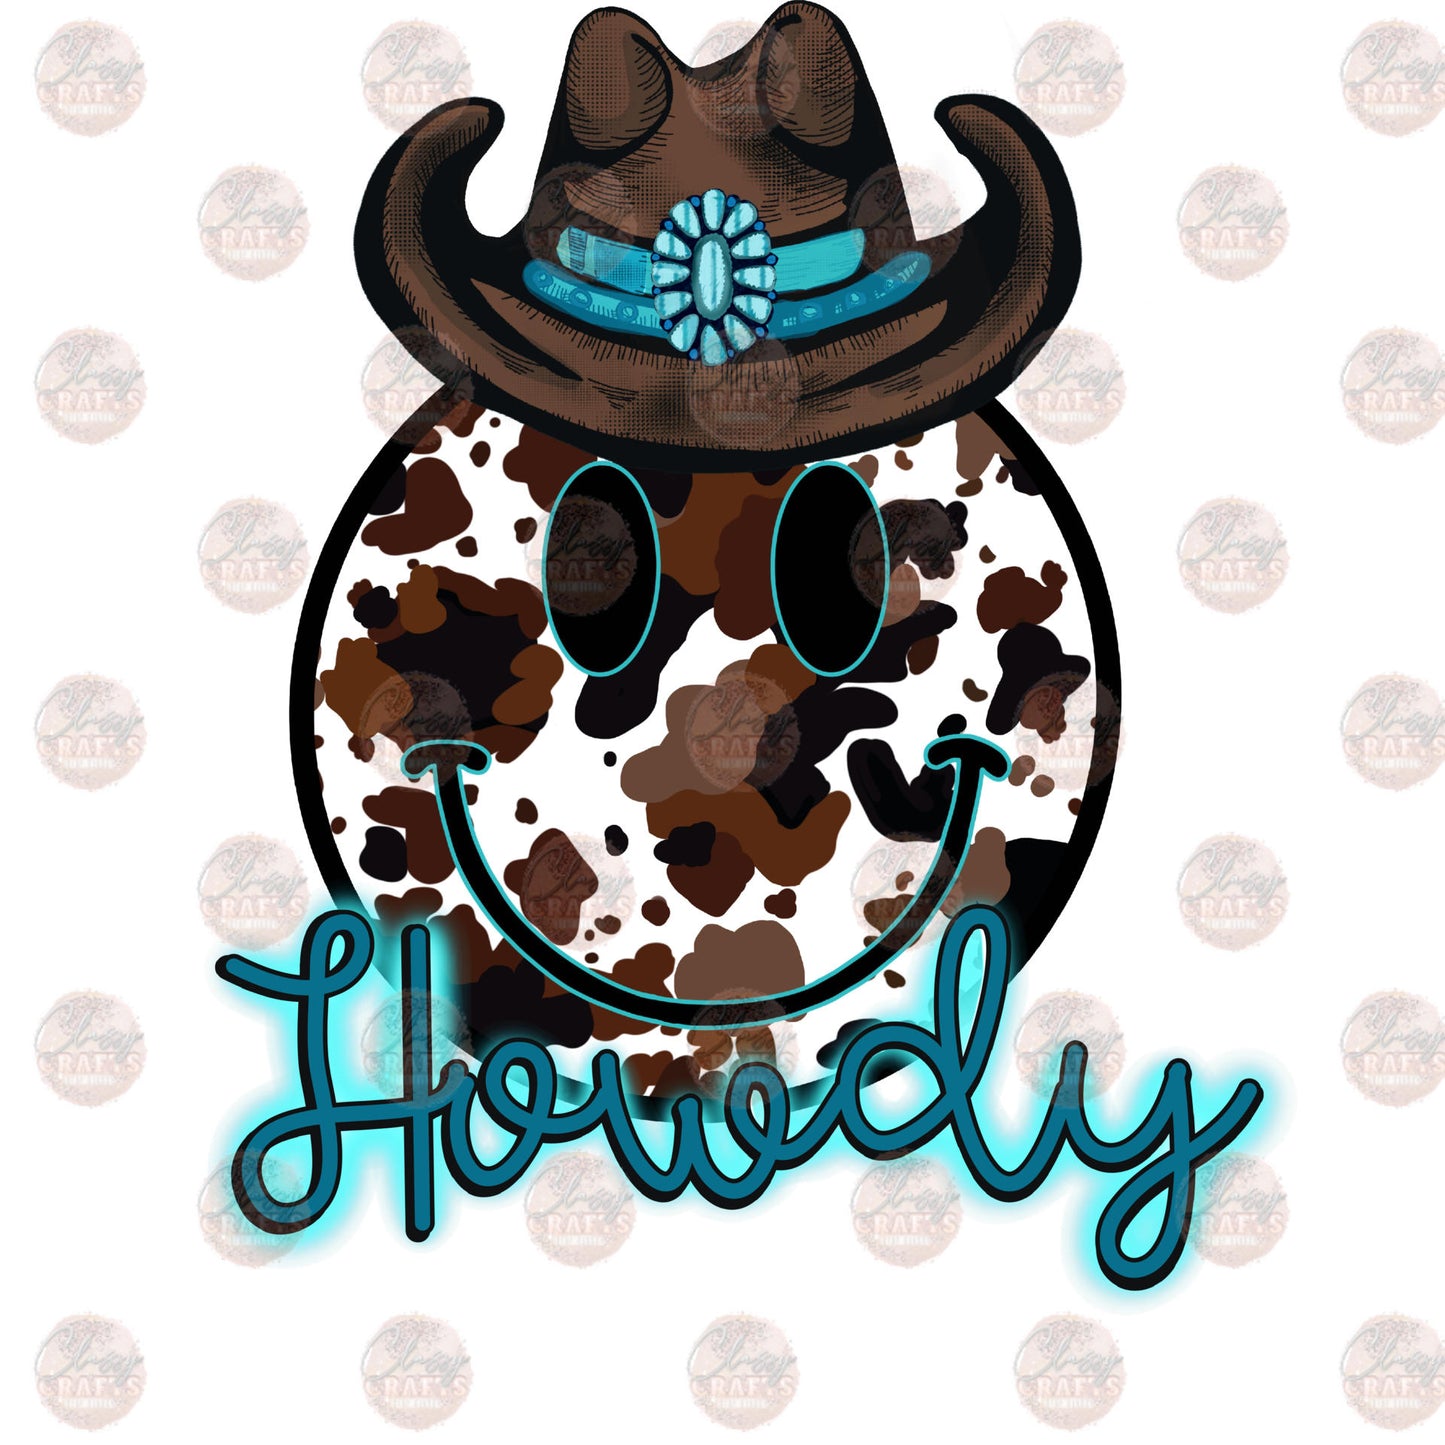 Howdy Smiley - Sublimation Transfer